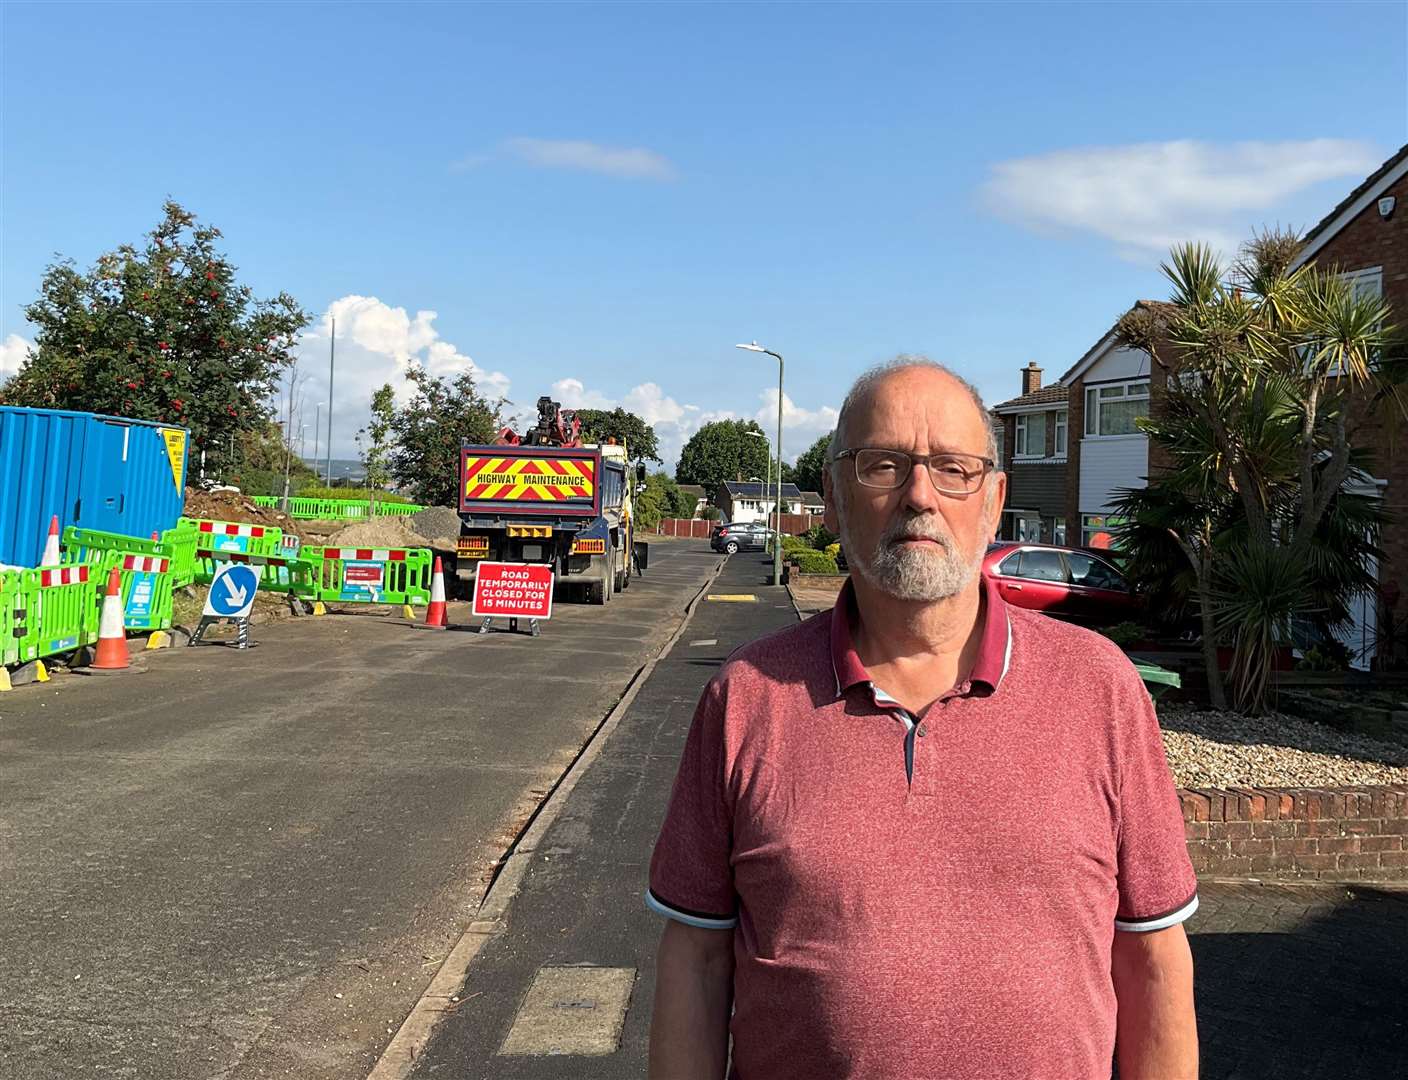 Alan Edwards of Adisham Drive, Allington, says a grass verge outside his home is being used as a "dump" by CityFibre. Picture: Alan Edwards